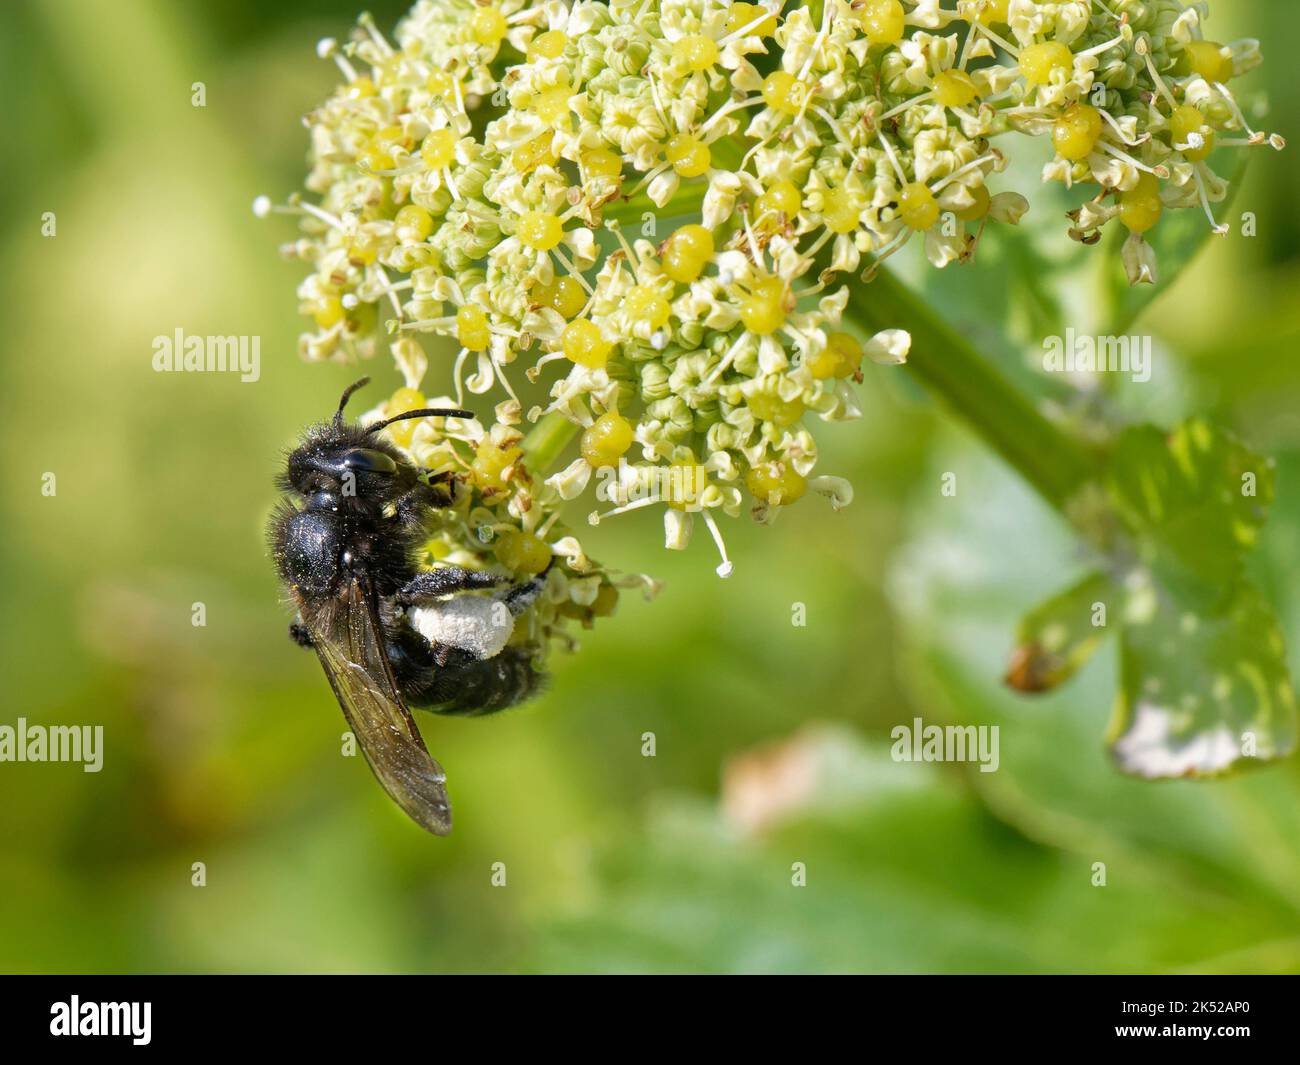 Black mining bee (Andrena pilipes) nationally scarce in the UK, female collecting pollen from Alexanders (Smyrnium olusatrum) flowers, Cornwall, UK Stock Photo